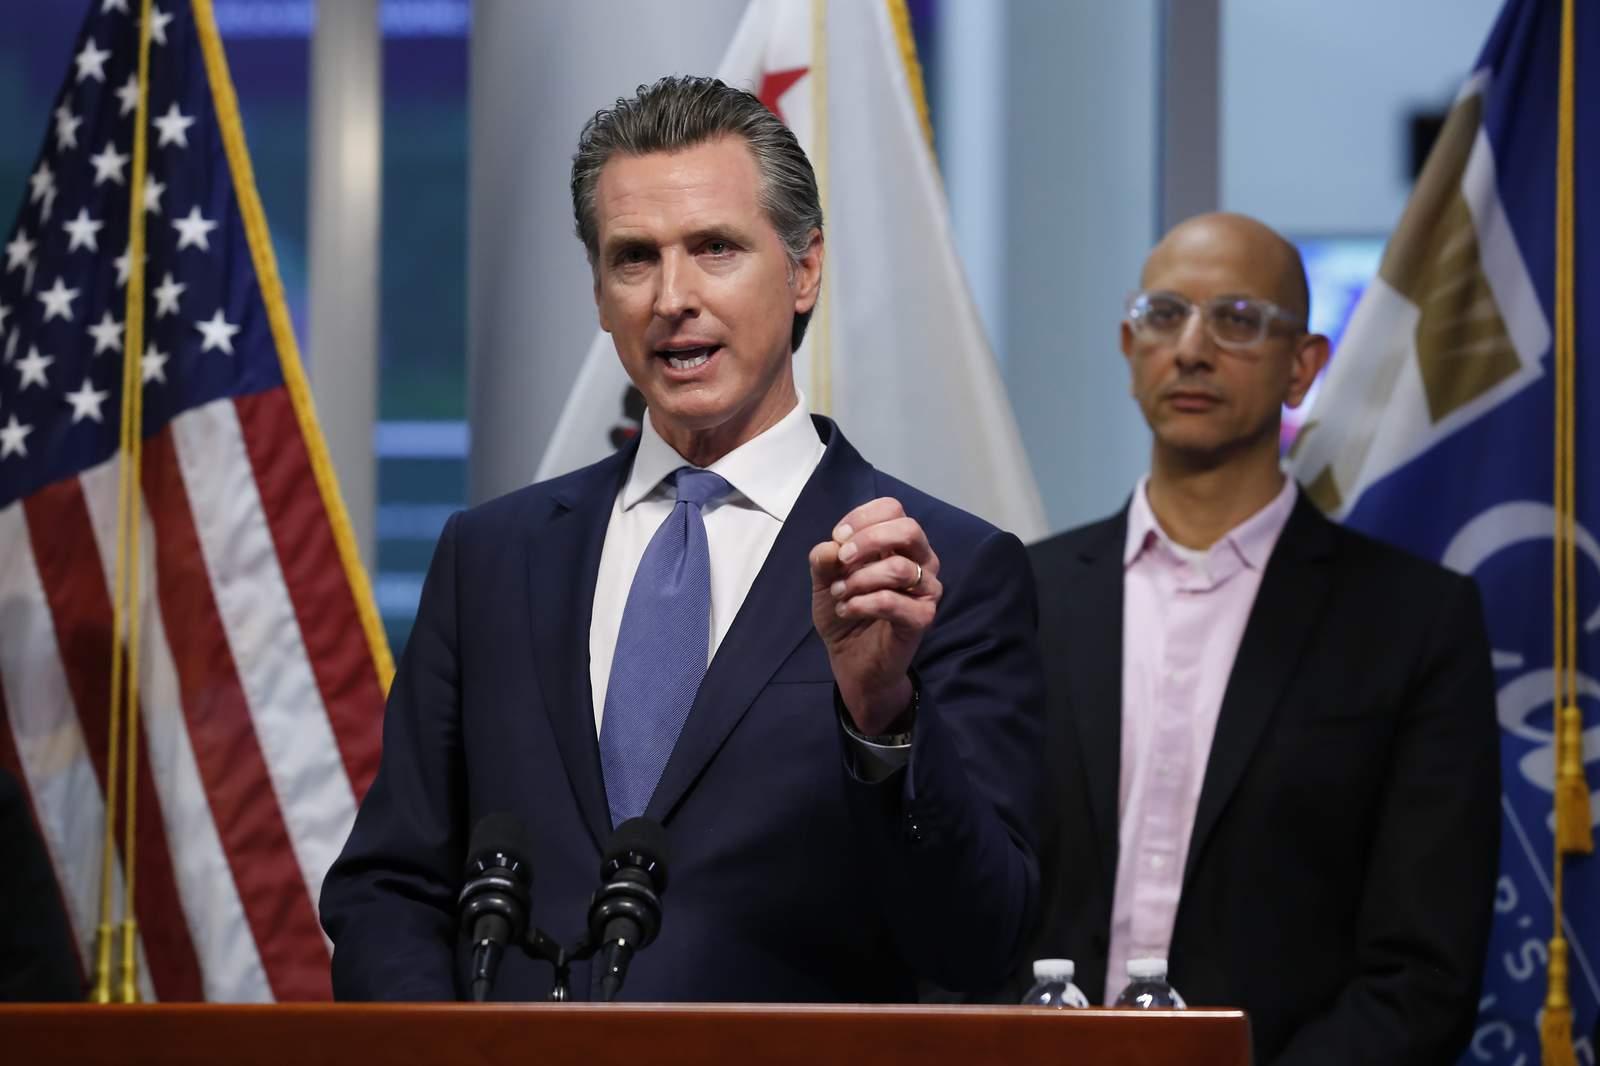 California governor issues statewide stayathome order